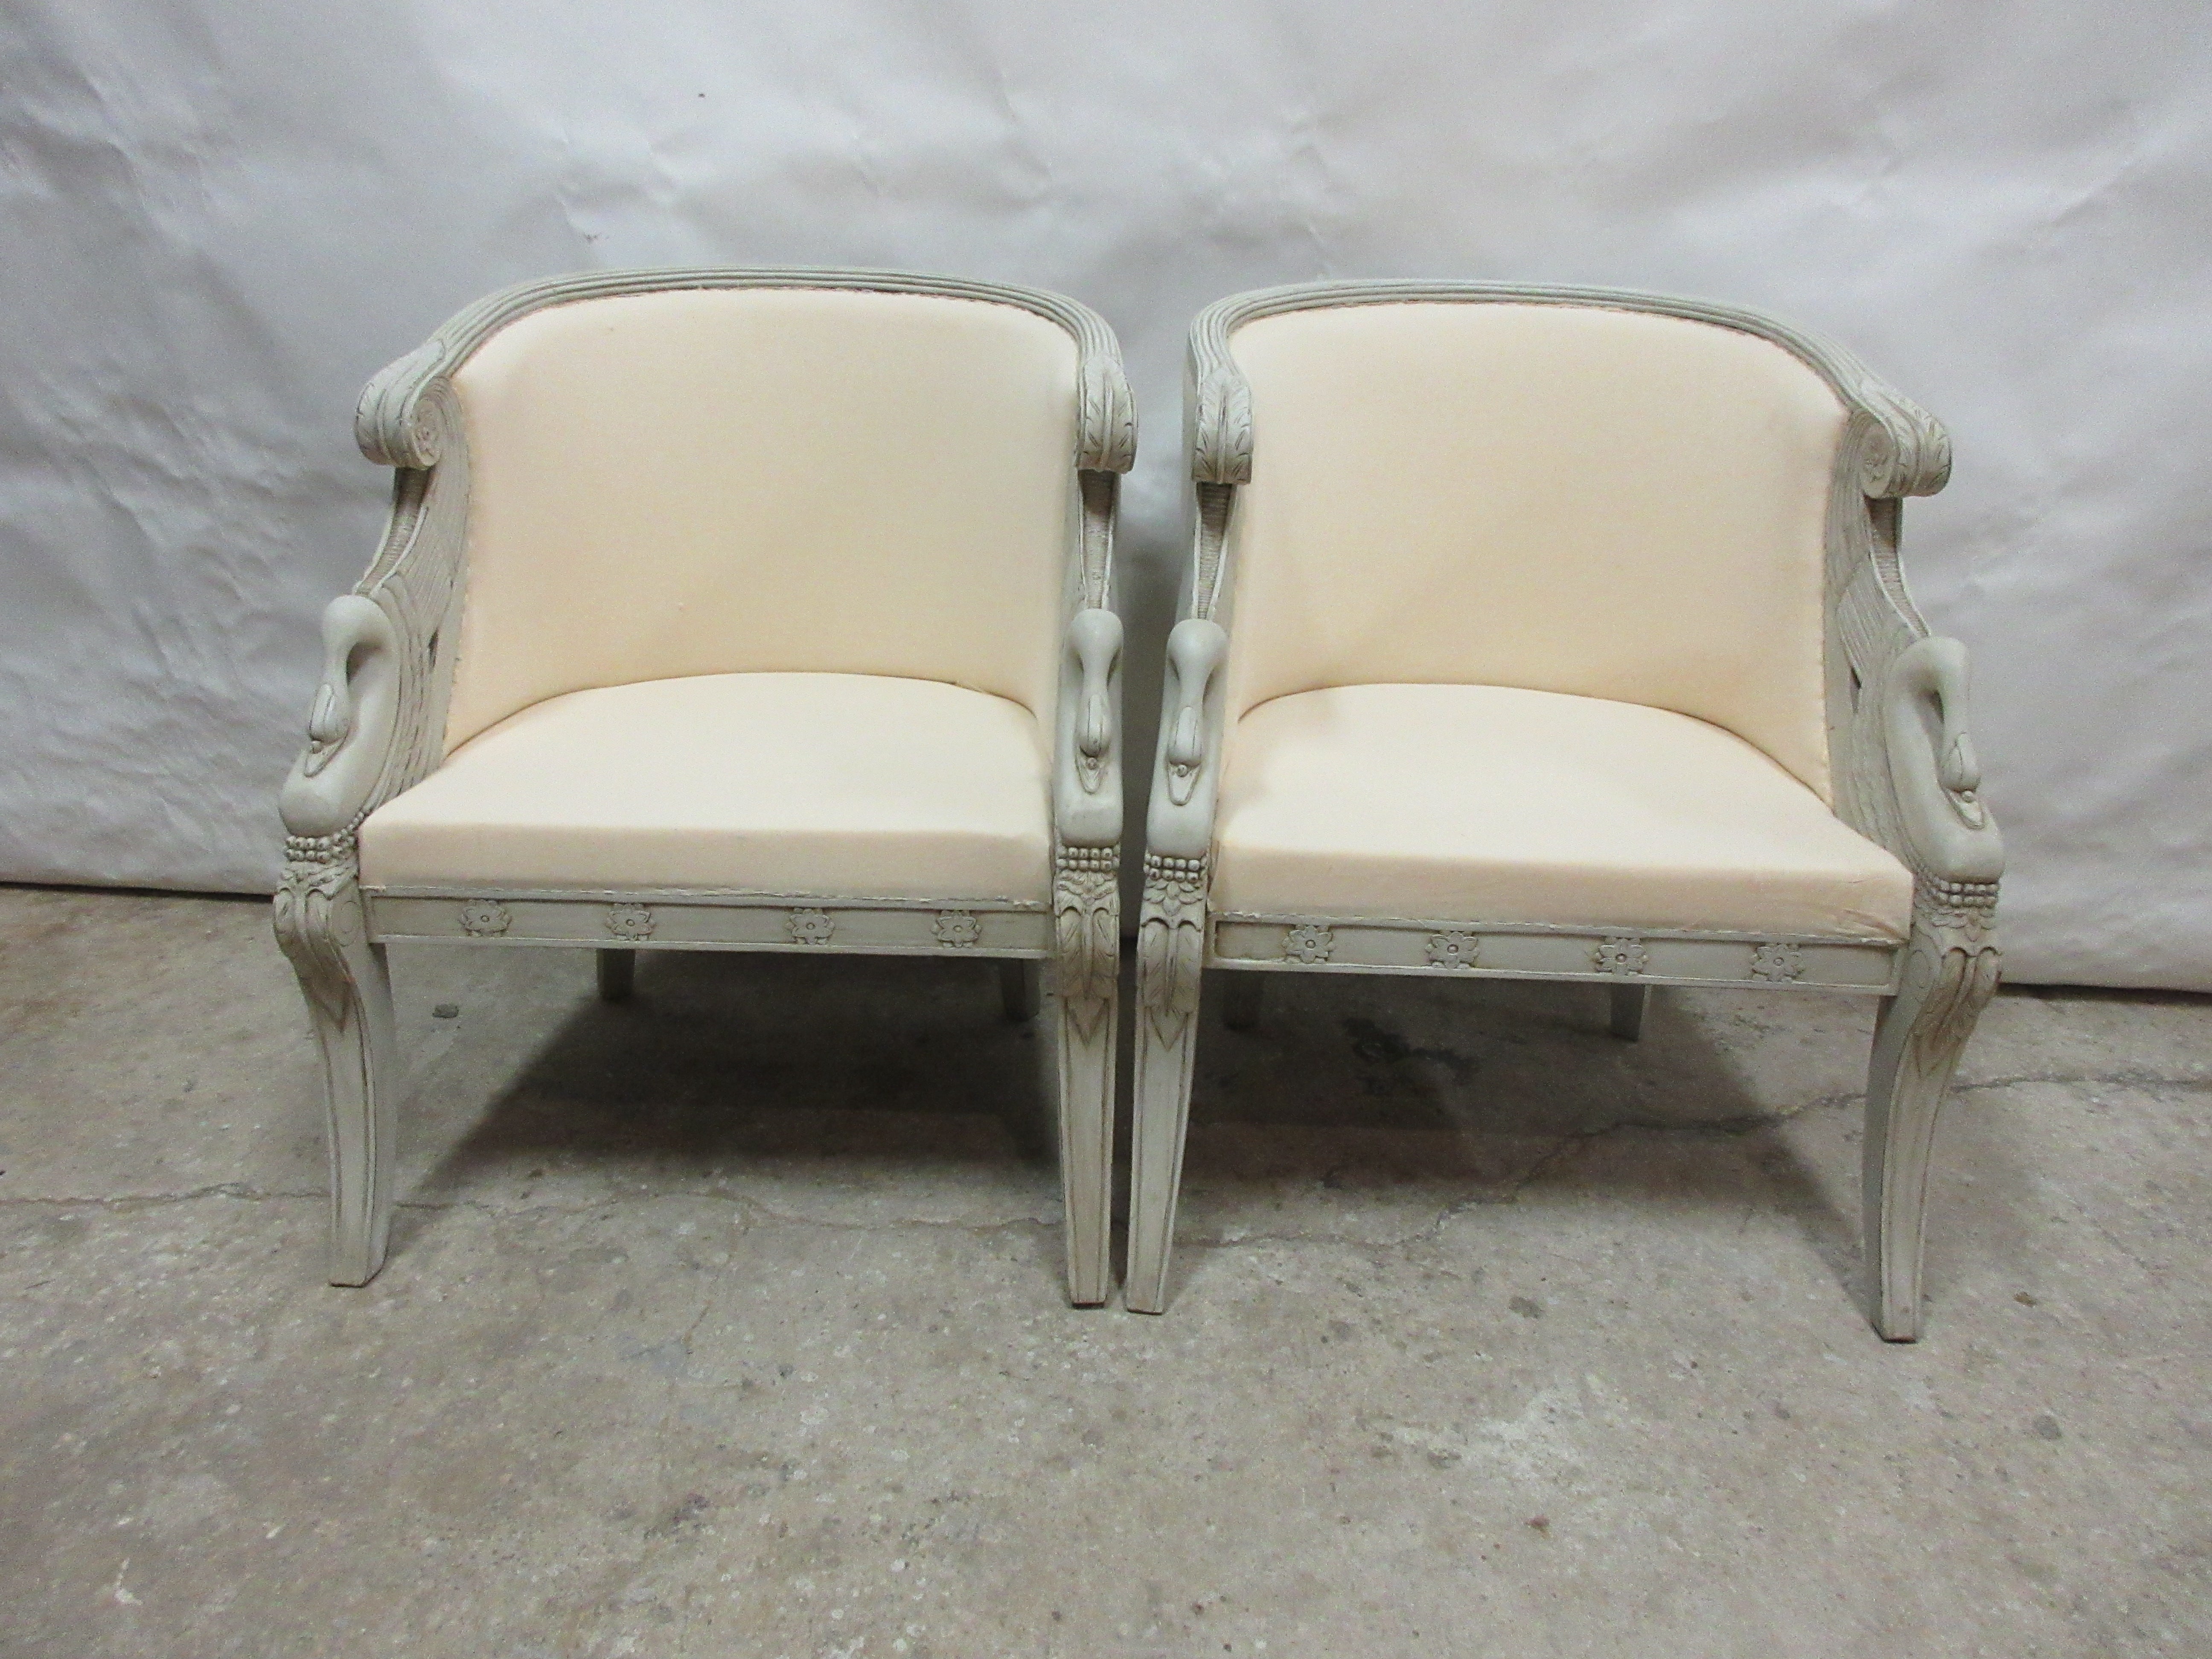 This is a unique set of 2 Swan Berger chairs, they have been restored and repainted with Milk Paints 